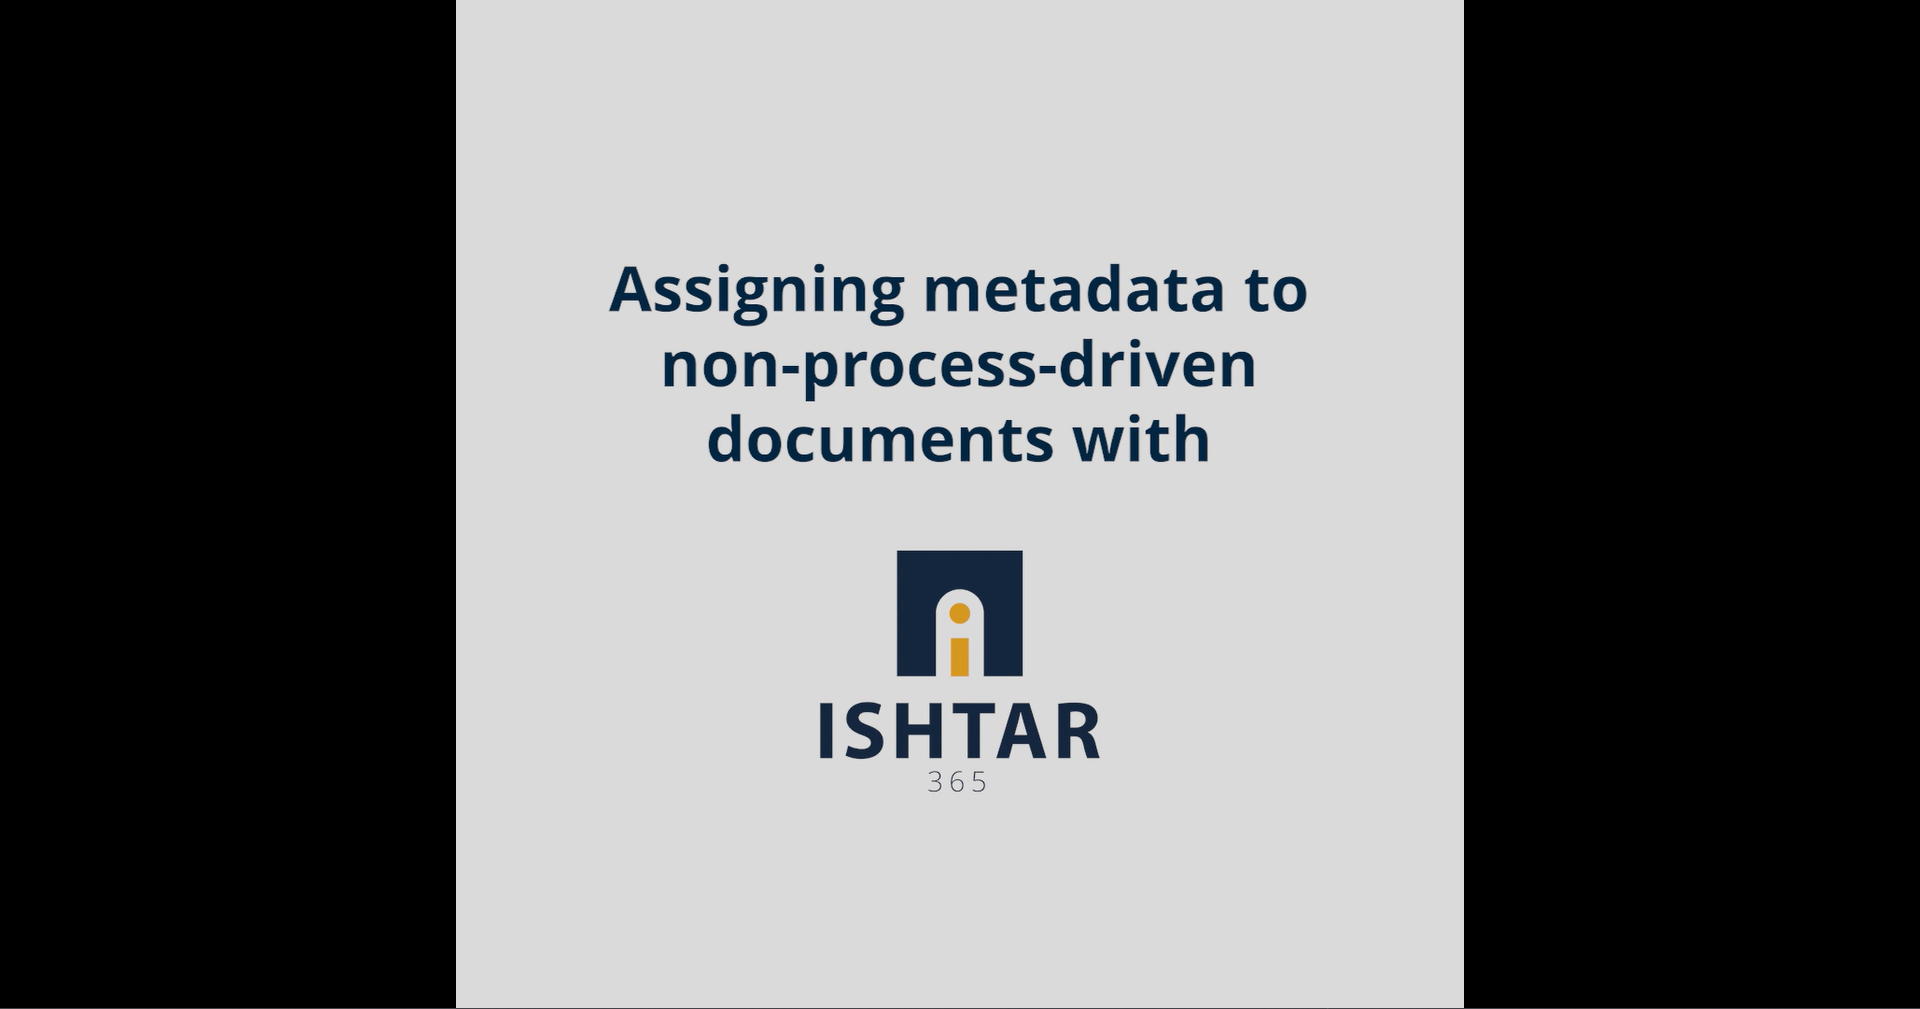 Assigning metadata to non-process driven documents